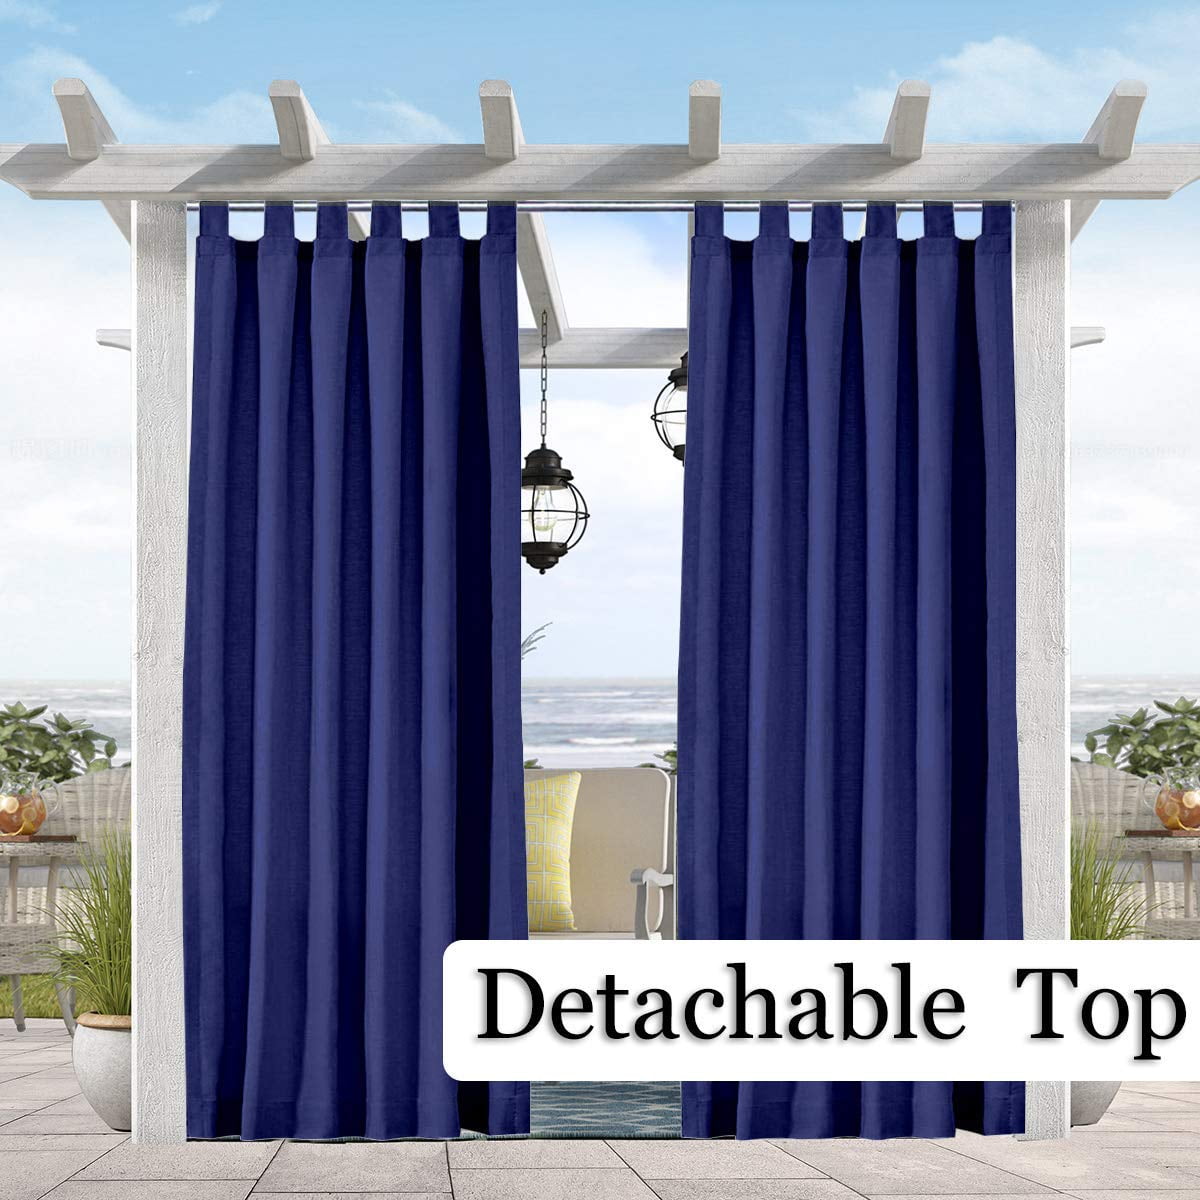 Pro Space Outdoor Curtains Tab Top (4